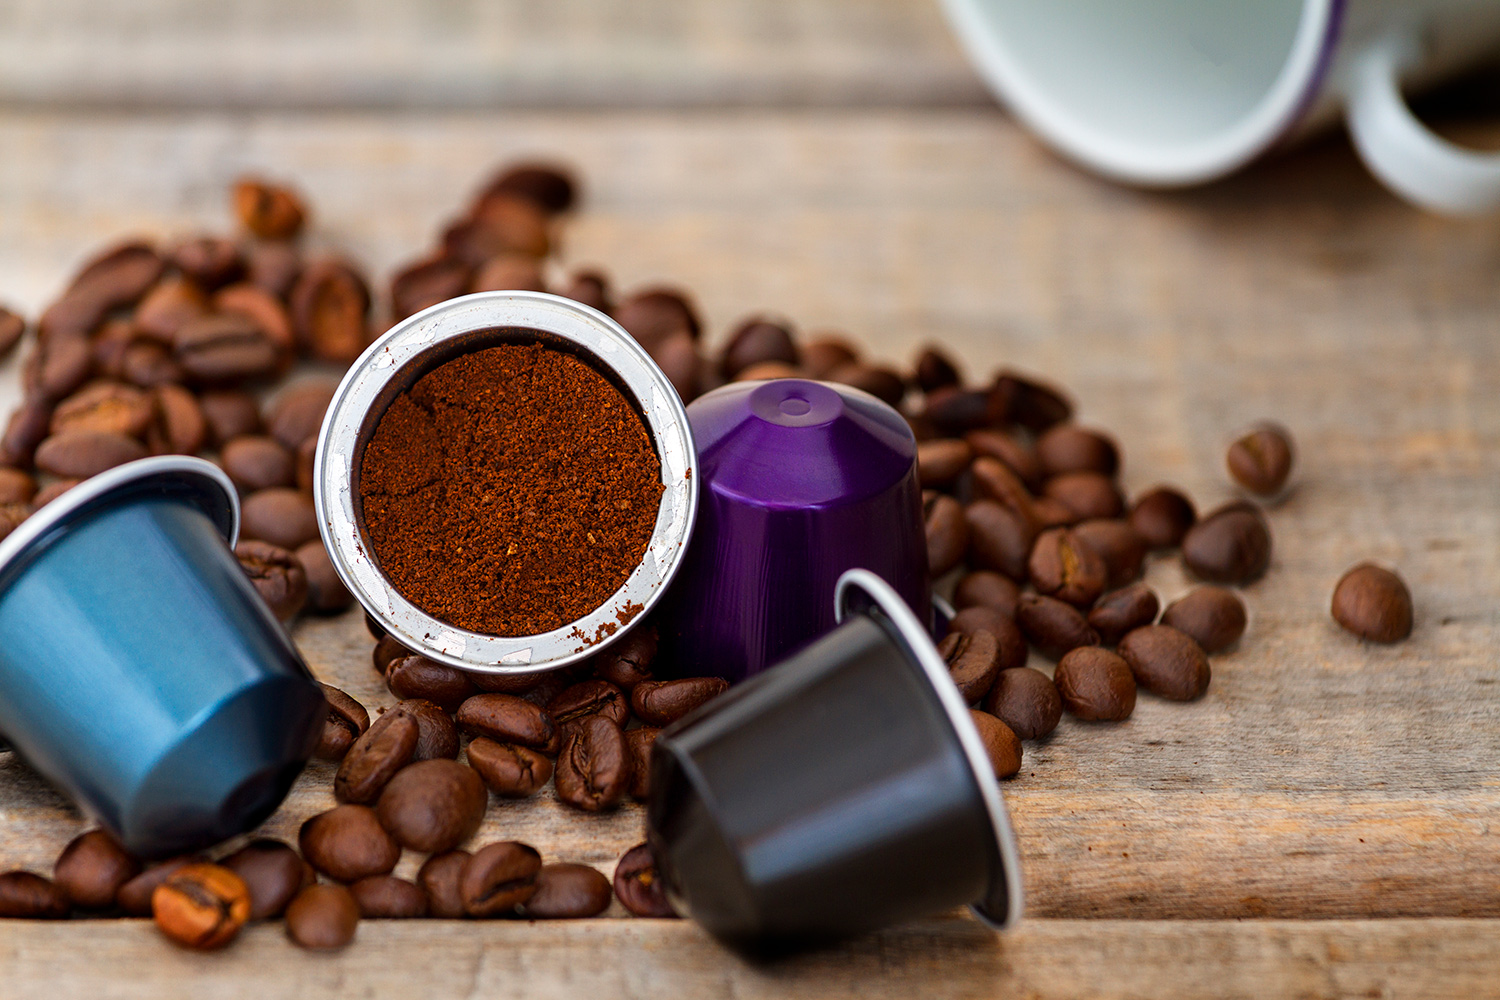 This brewer and grinder can prep K-Cup and ground coffee in 3